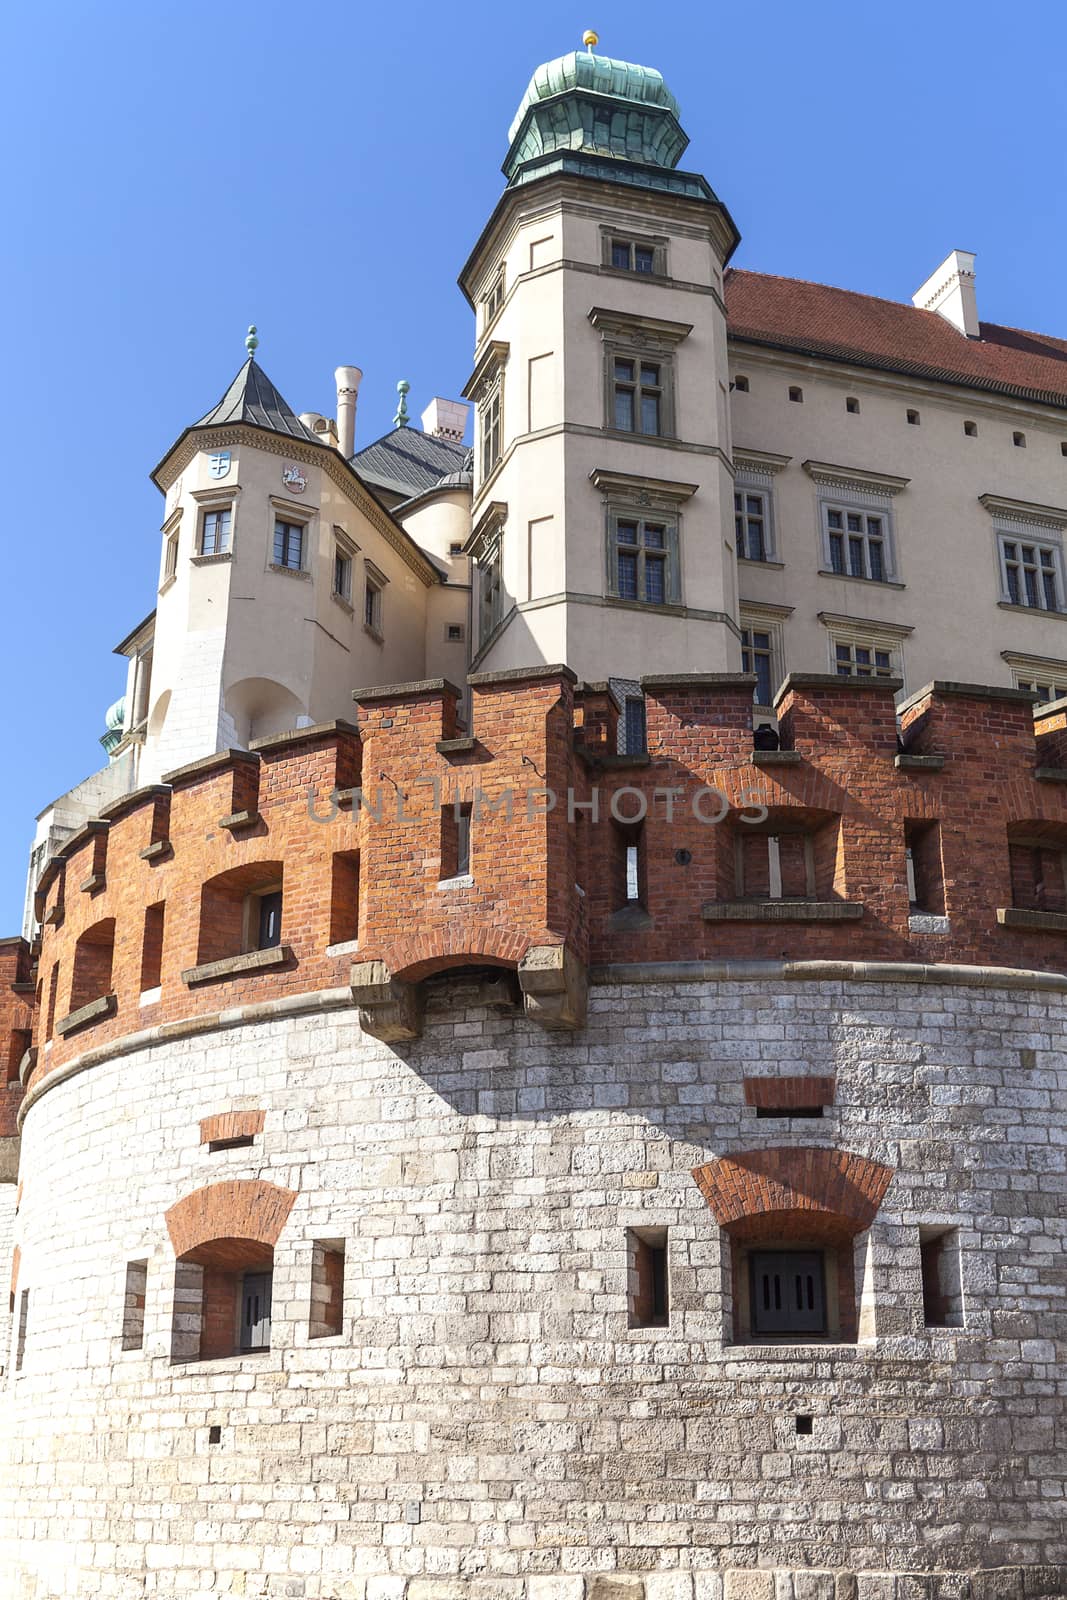 Wawel Royal Castle with defensive wall, Krakow, Poland by mychadre77